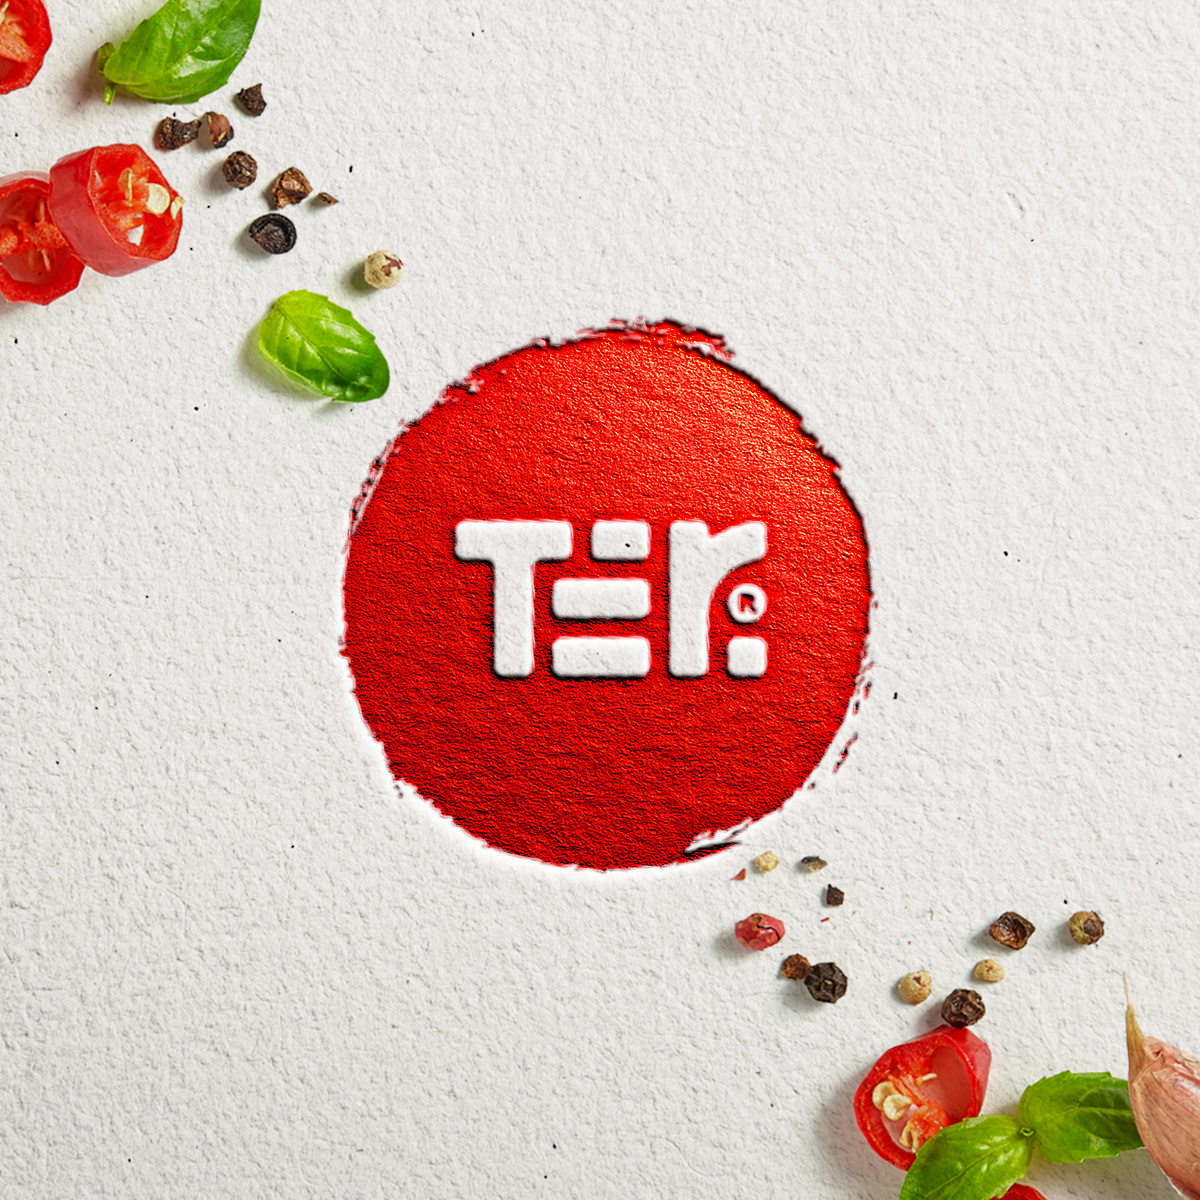 Teri. Brand identity and packaging for a food company